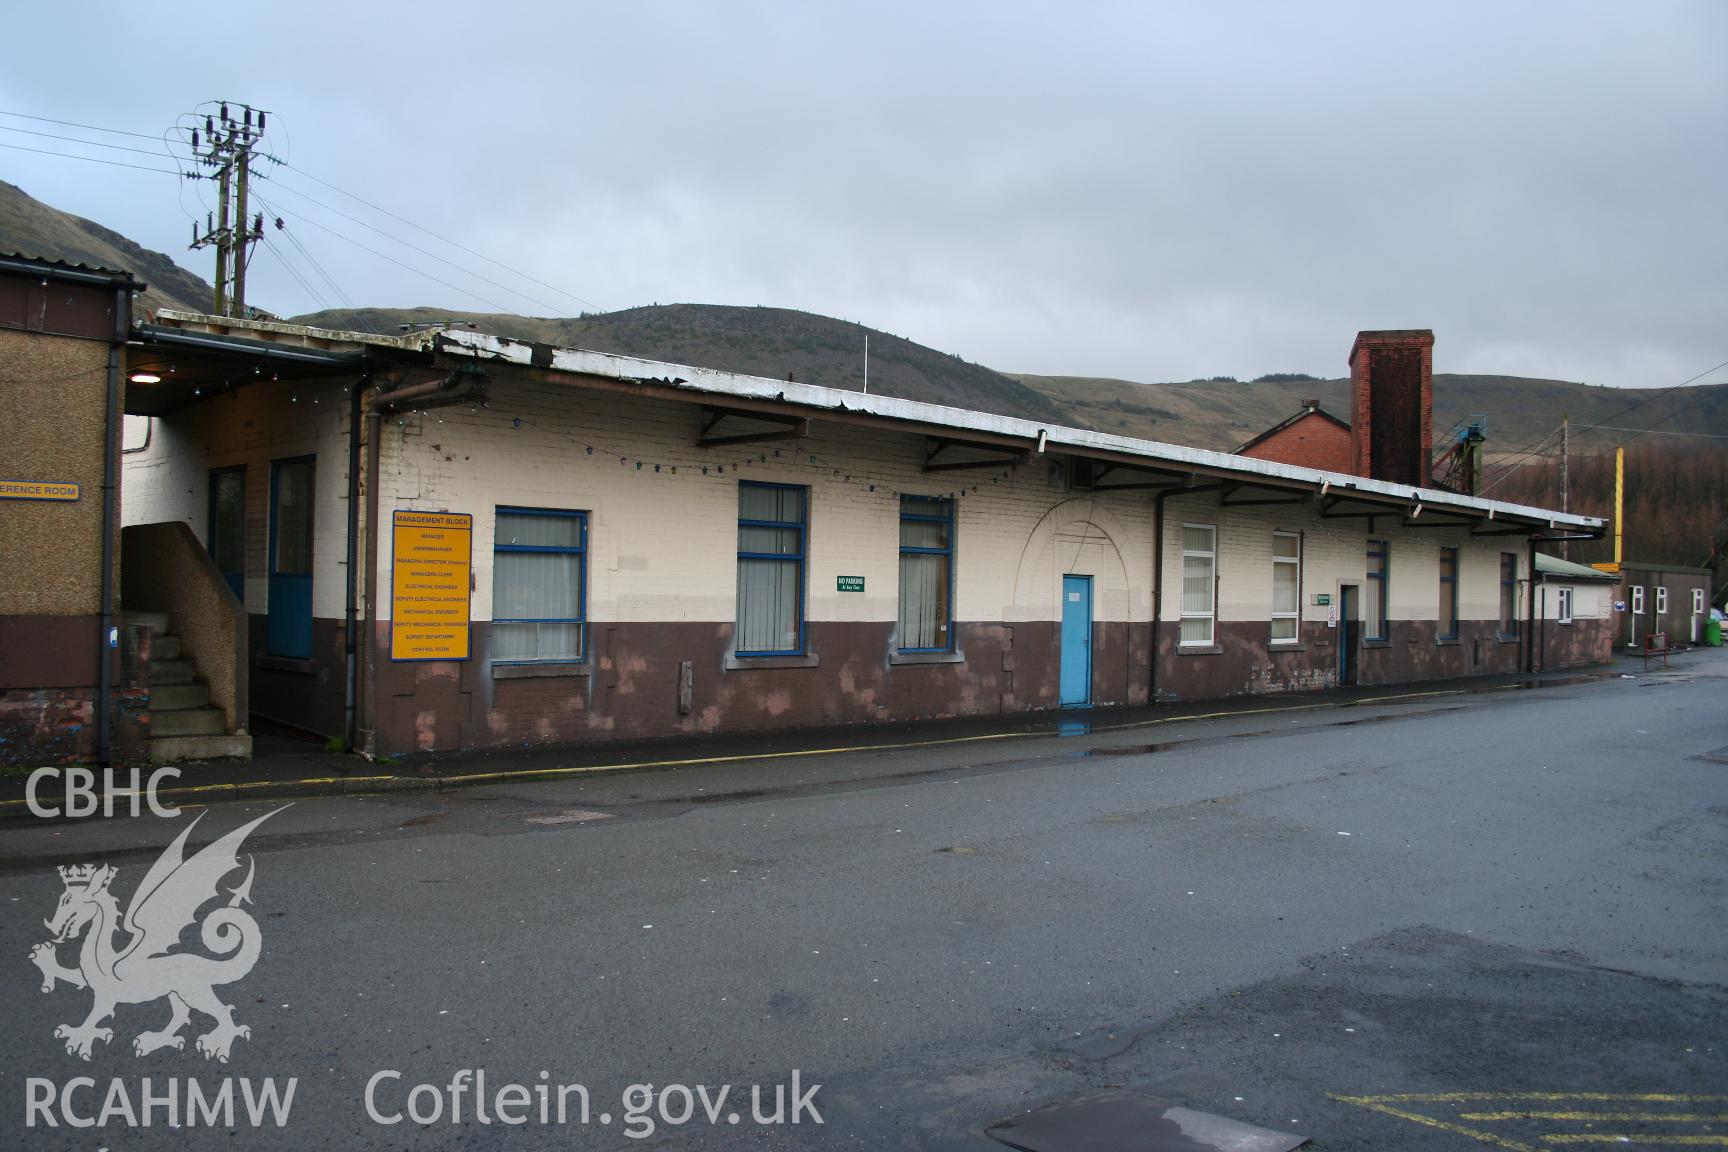 Management Block at Tower Colliery from the north, taken by Brian Malaws on 17 January 2008.